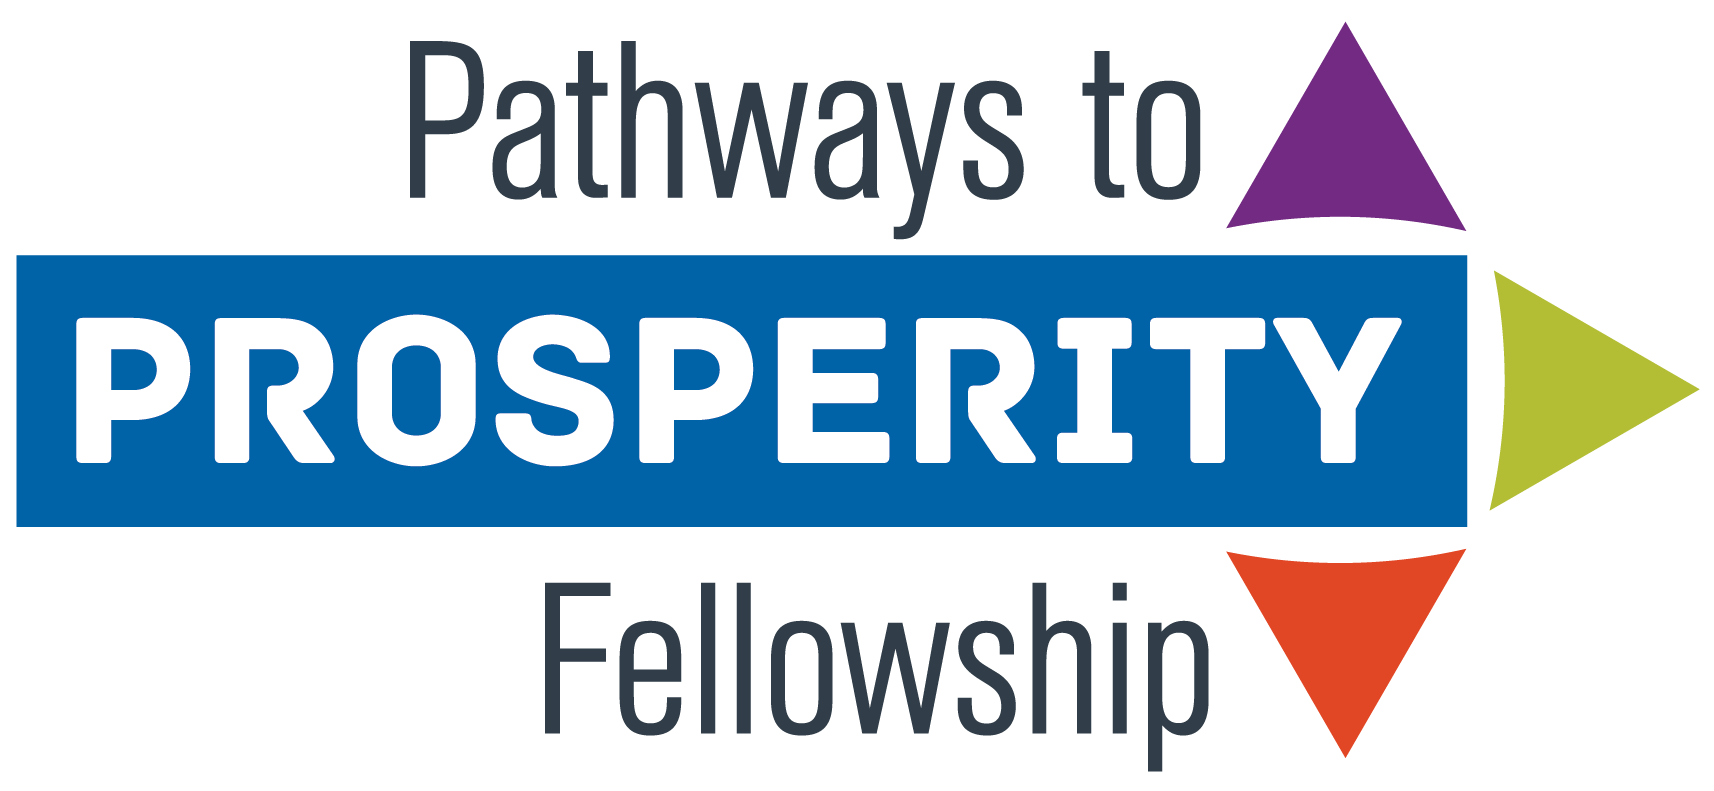 BRAC's Pathway to Posterity Fellowships